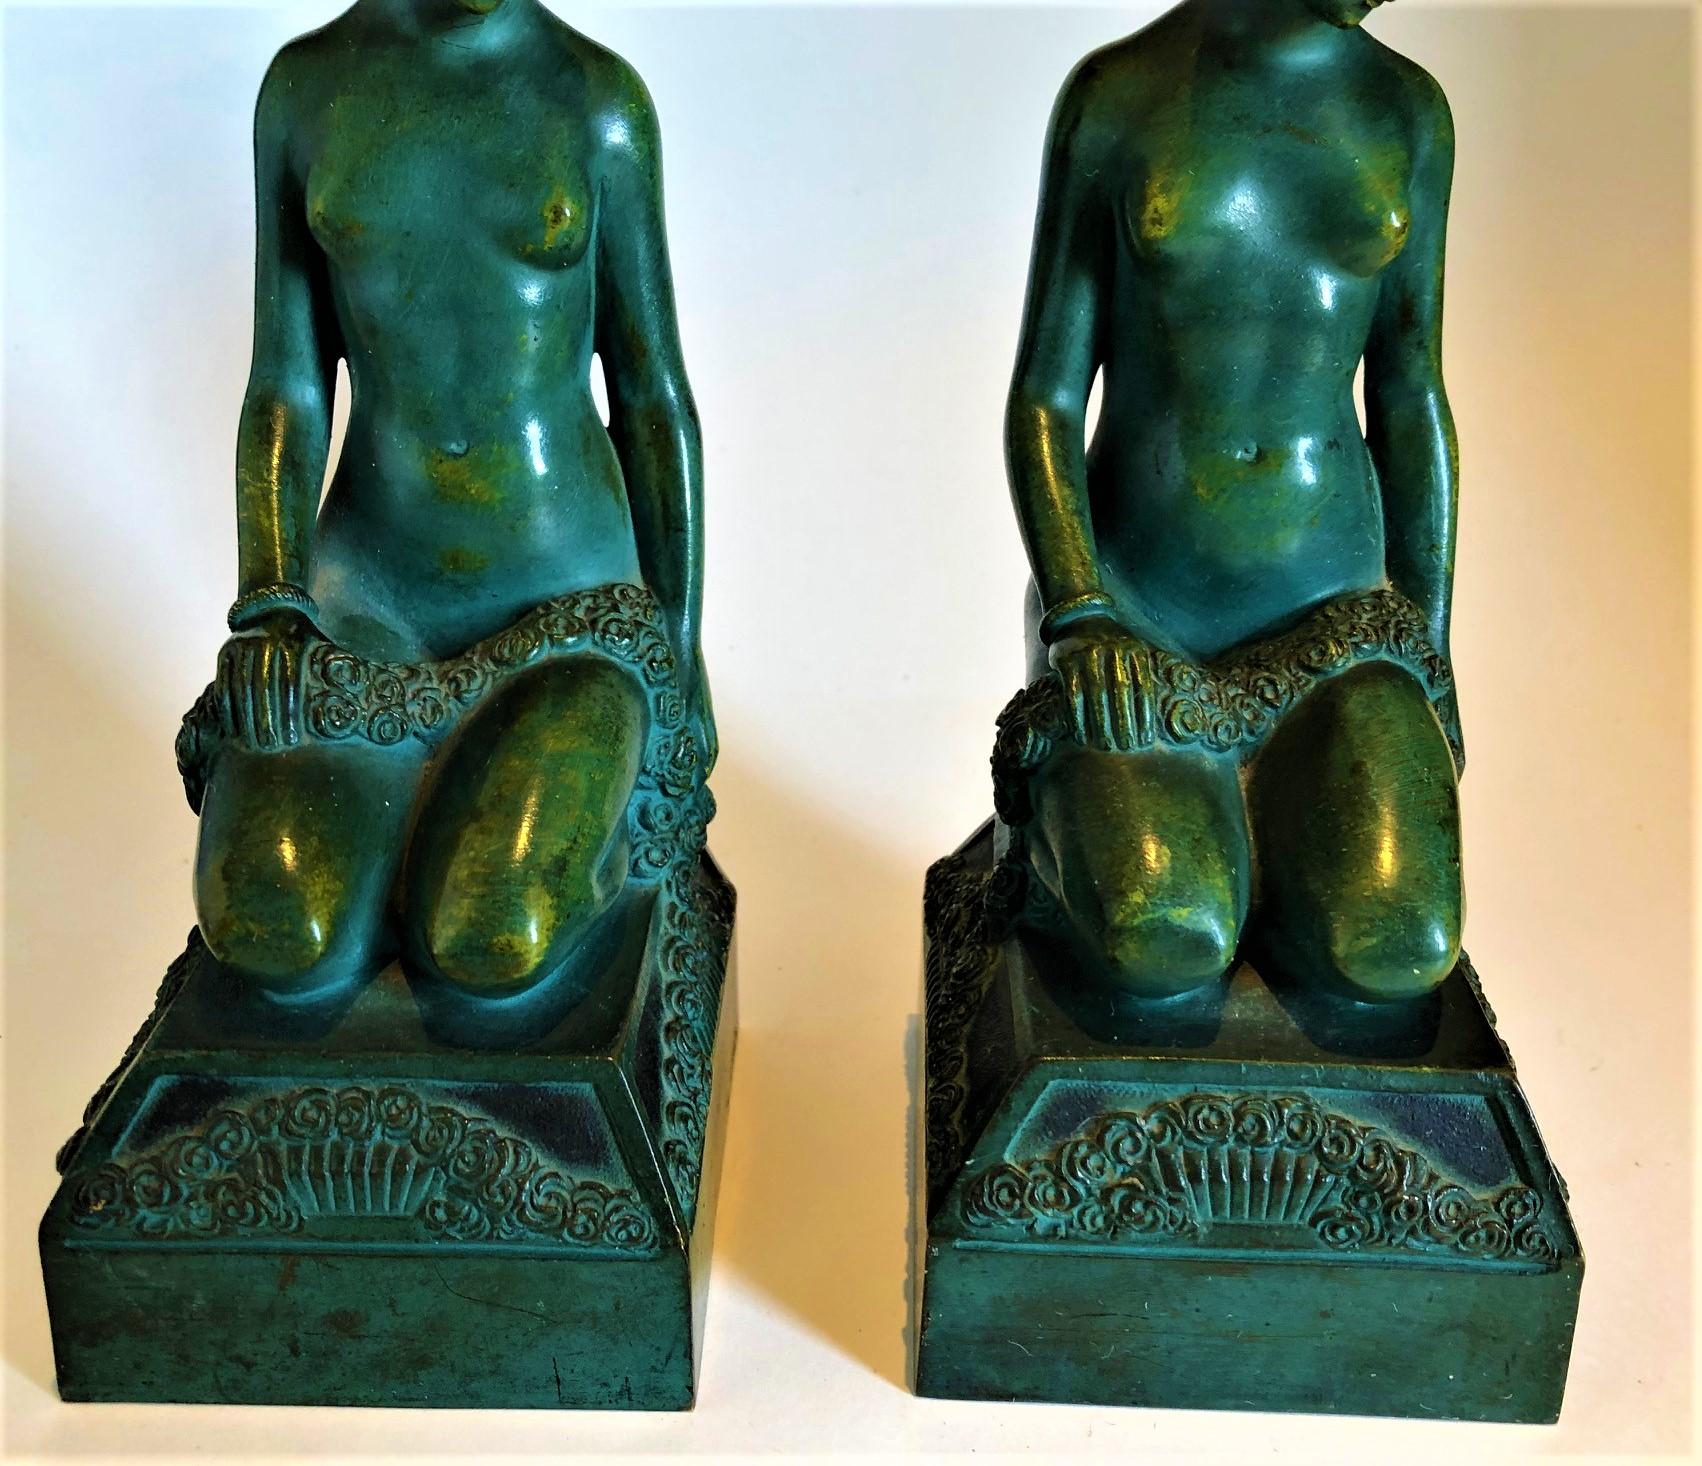 Art Deco Nude Erotic Woman Bronze Bookends, c. France 1925, Signed Scribe 7